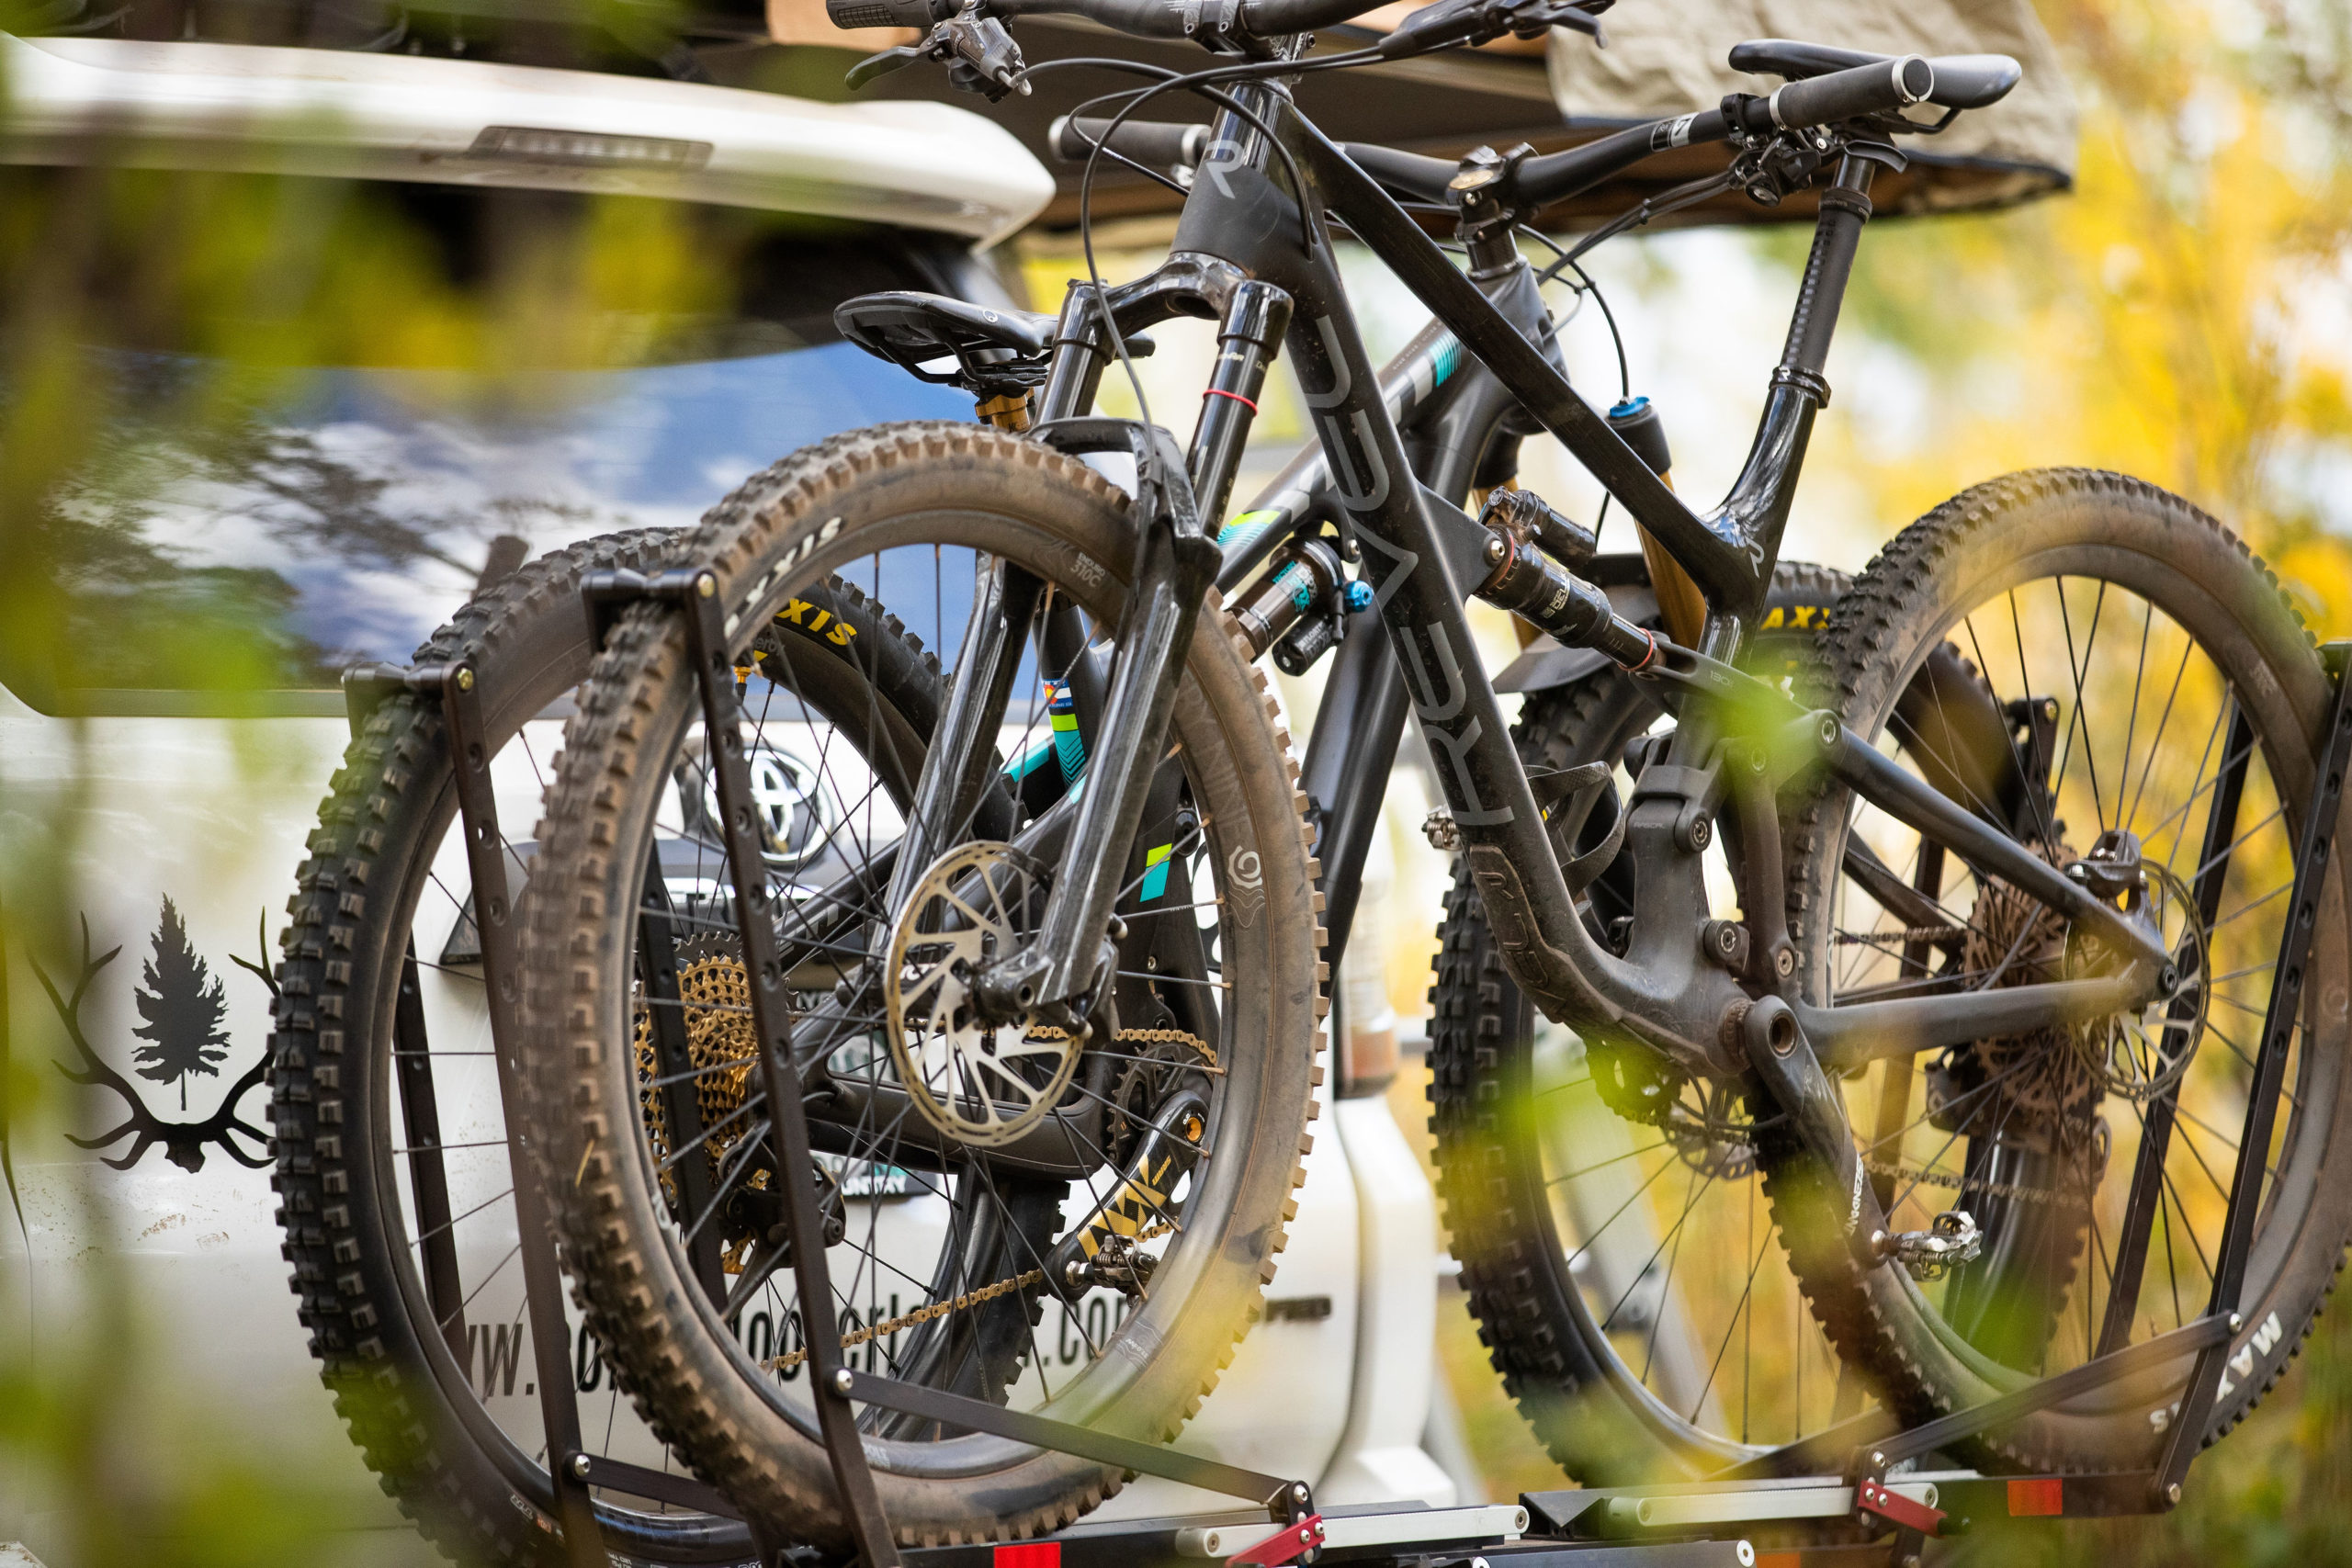 Image of a bike rack with two mountain bikes attached